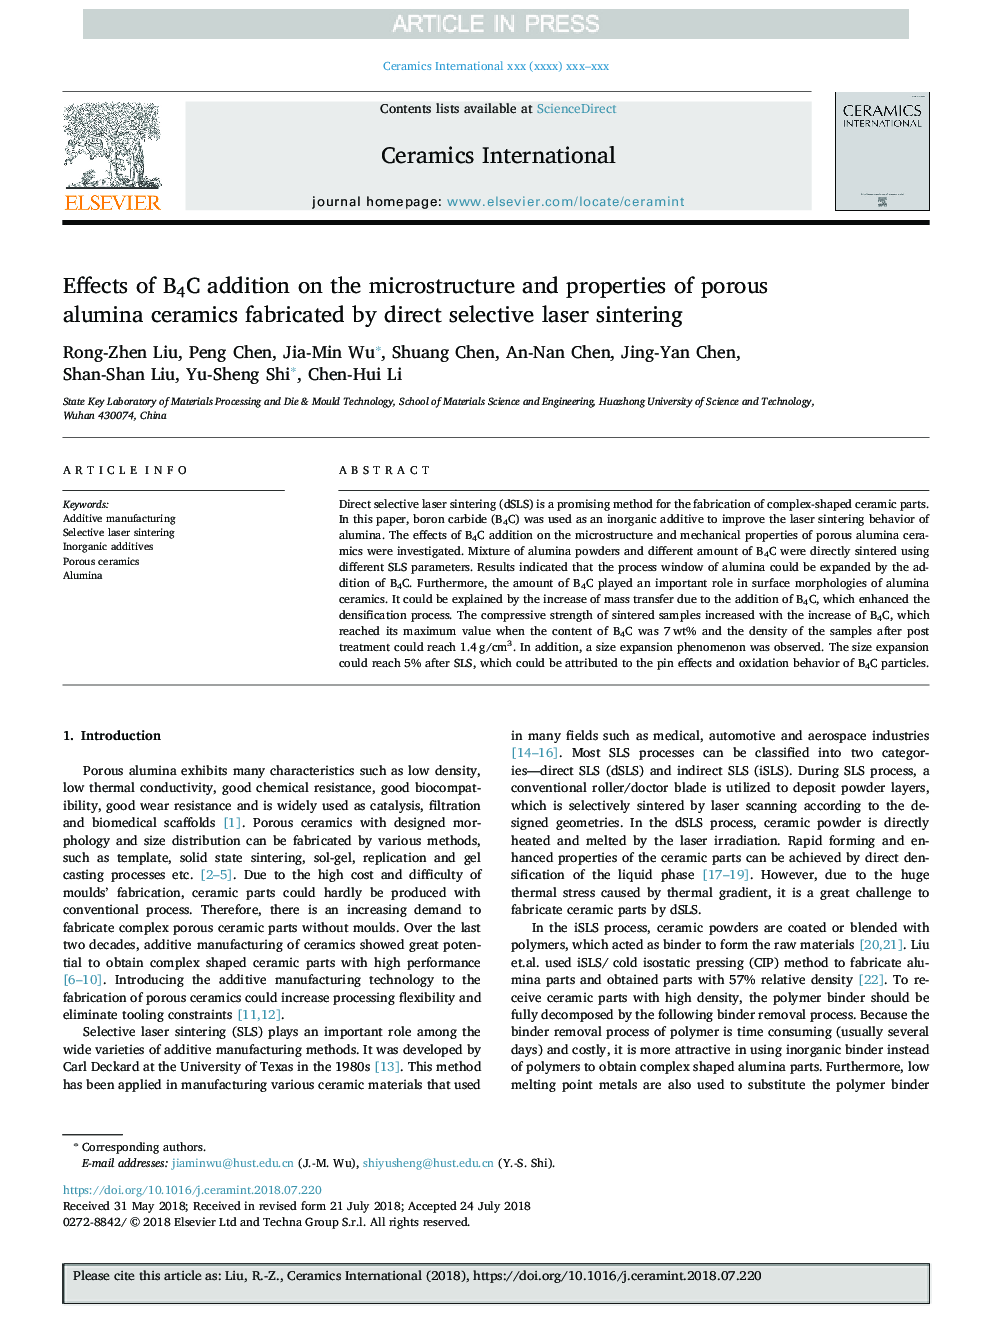 Effects of B4C addition on the microstructure and properties of porous alumina ceramics fabricated by direct selective laser sintering